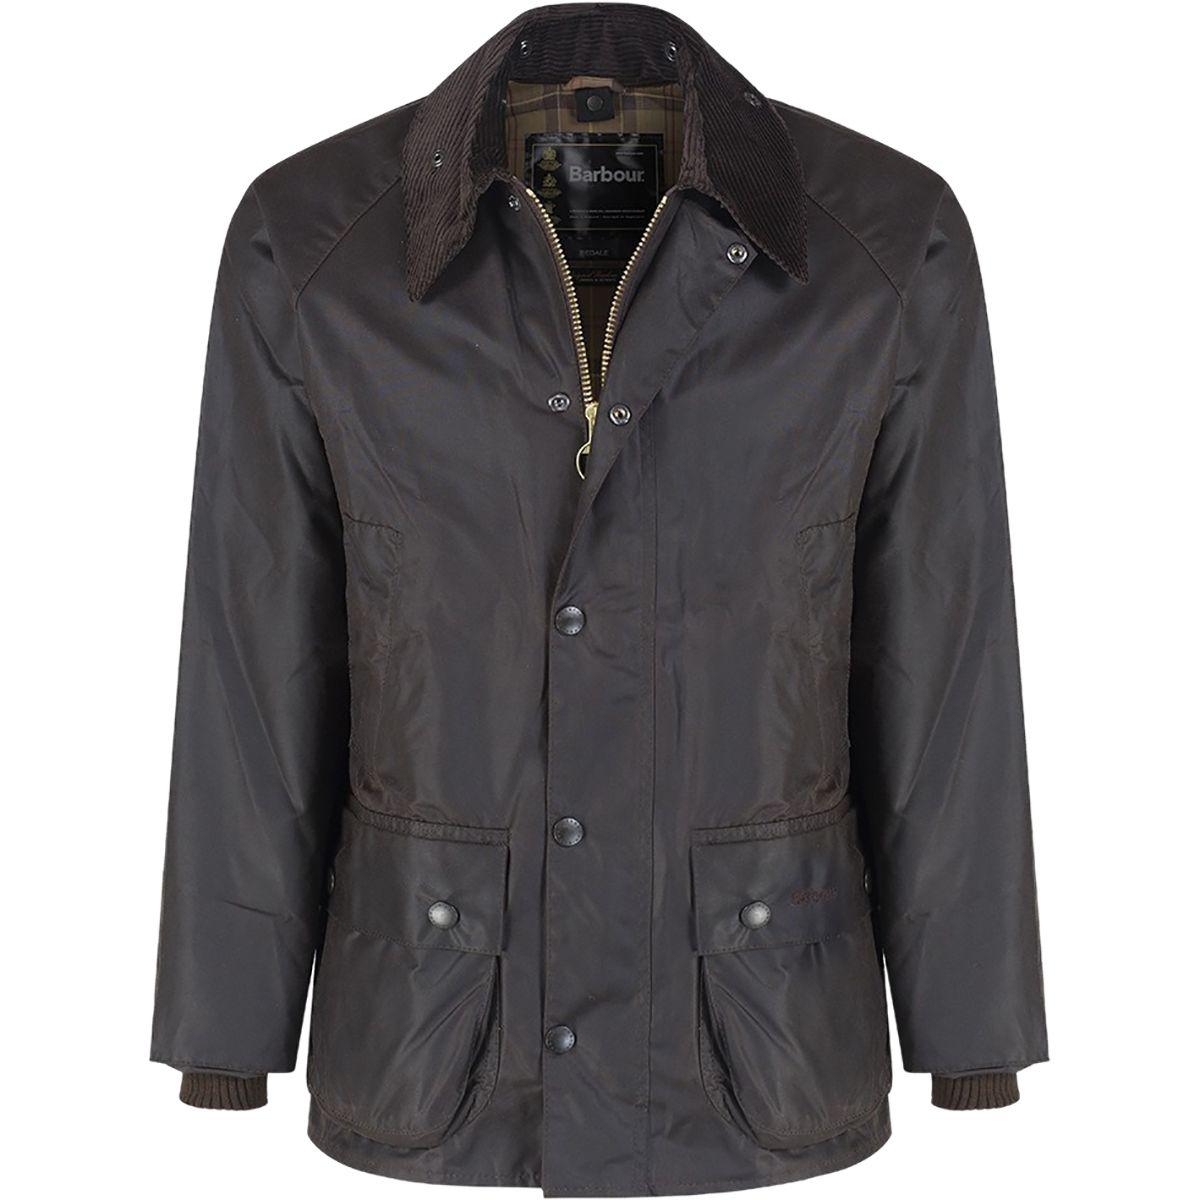 Barbour Cotton Bedale Wax Jacket in Black for Men - Lyst